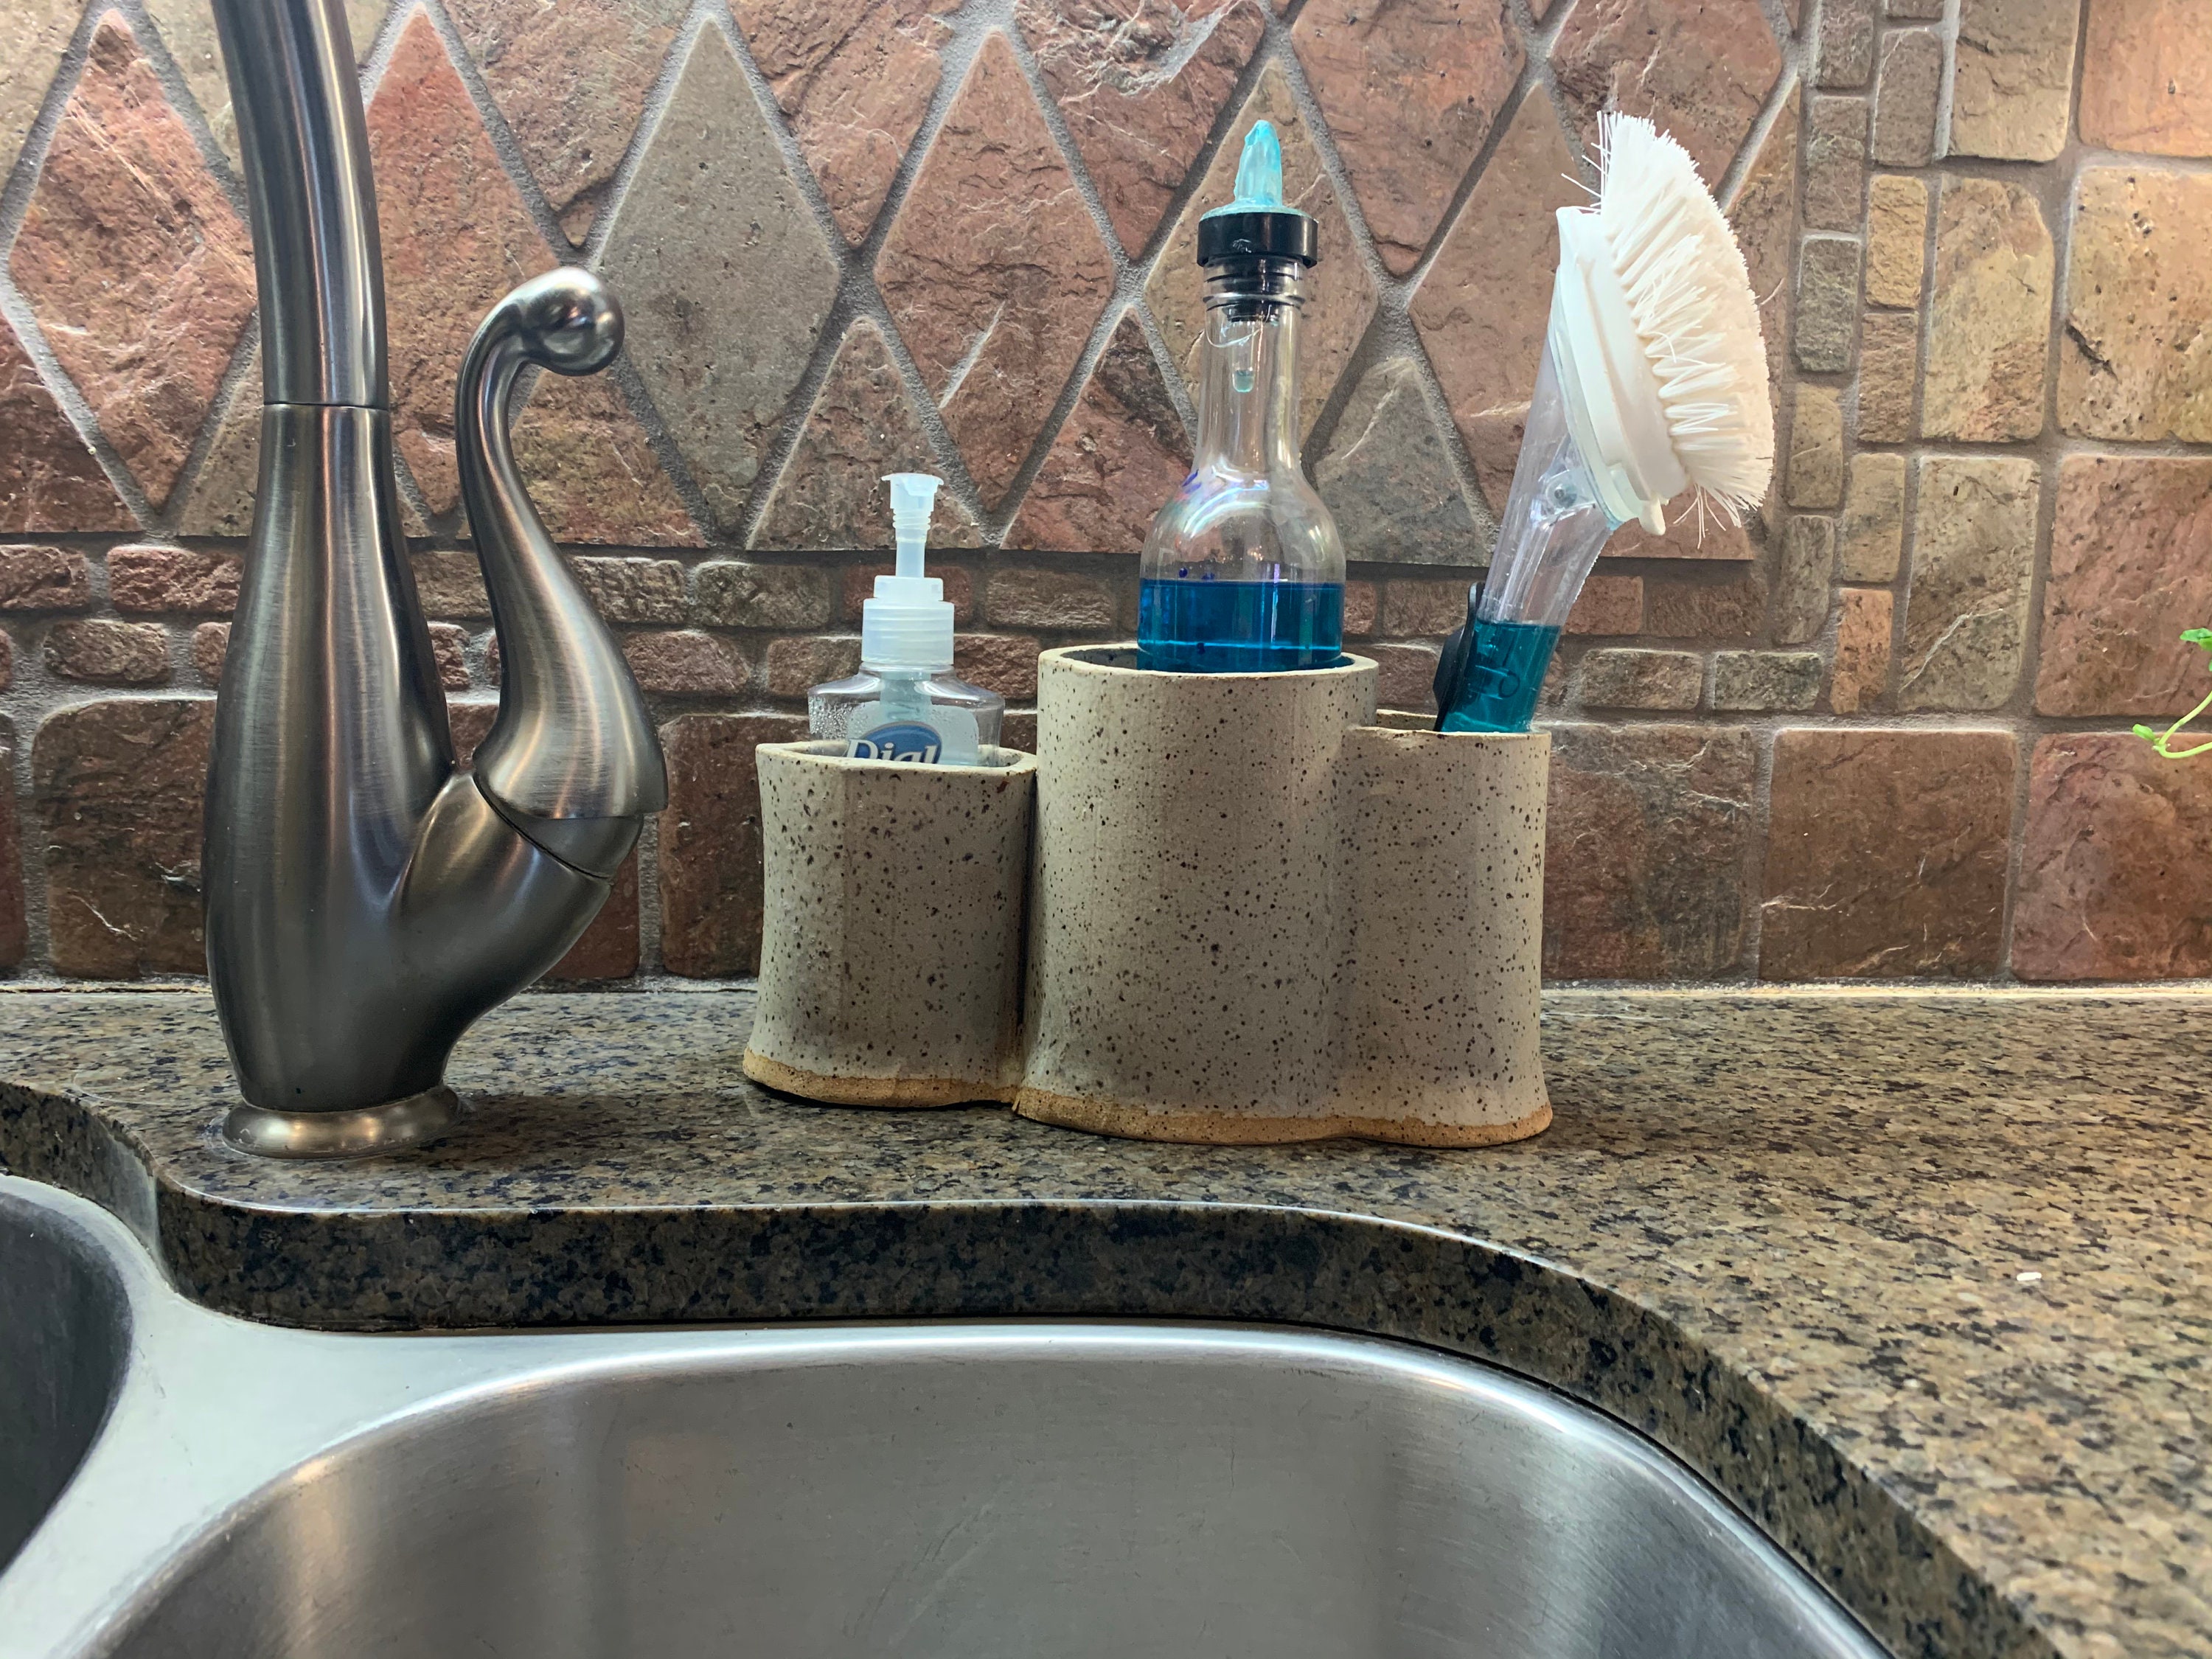 Handmade Ceramic Kitchen Sink Caddy With Glass Bottle Soap and